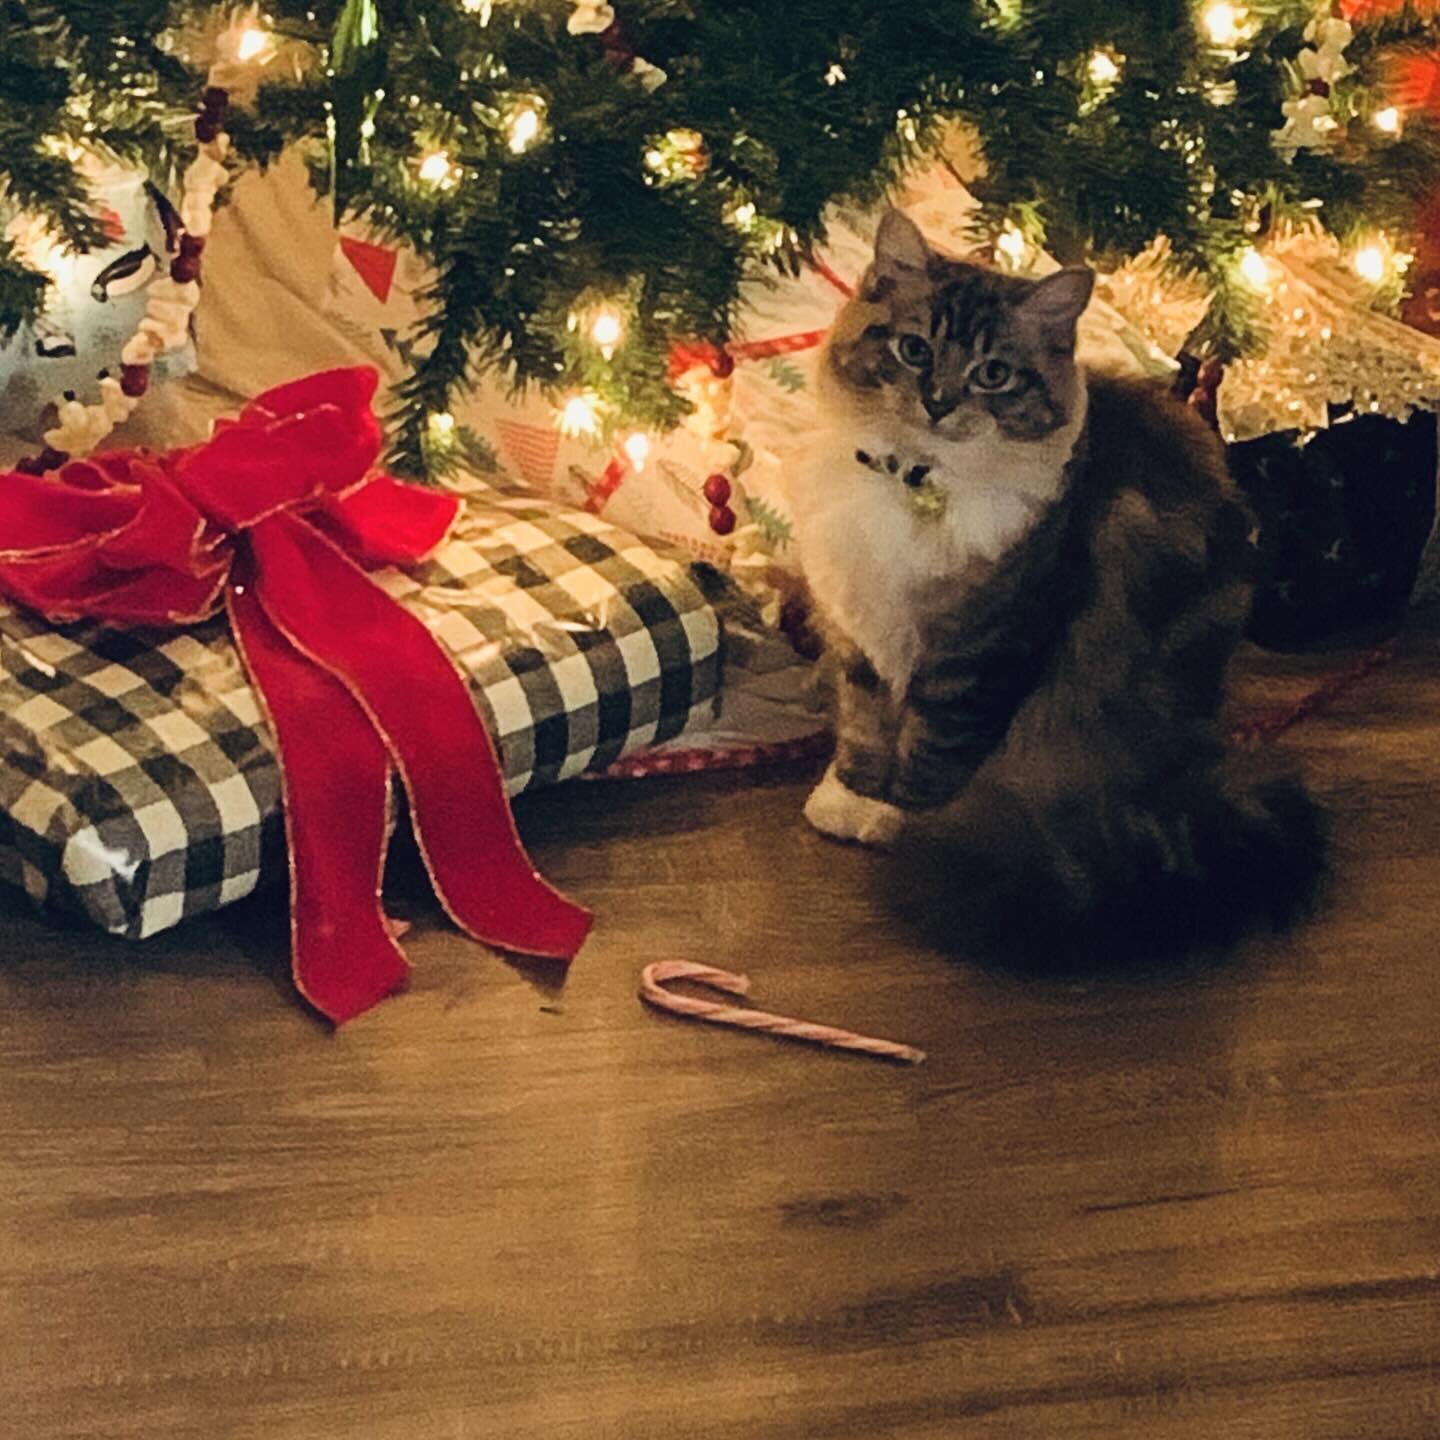 Candy Cane Bandit - Caught Red Handed and Trying To Play Innocent.